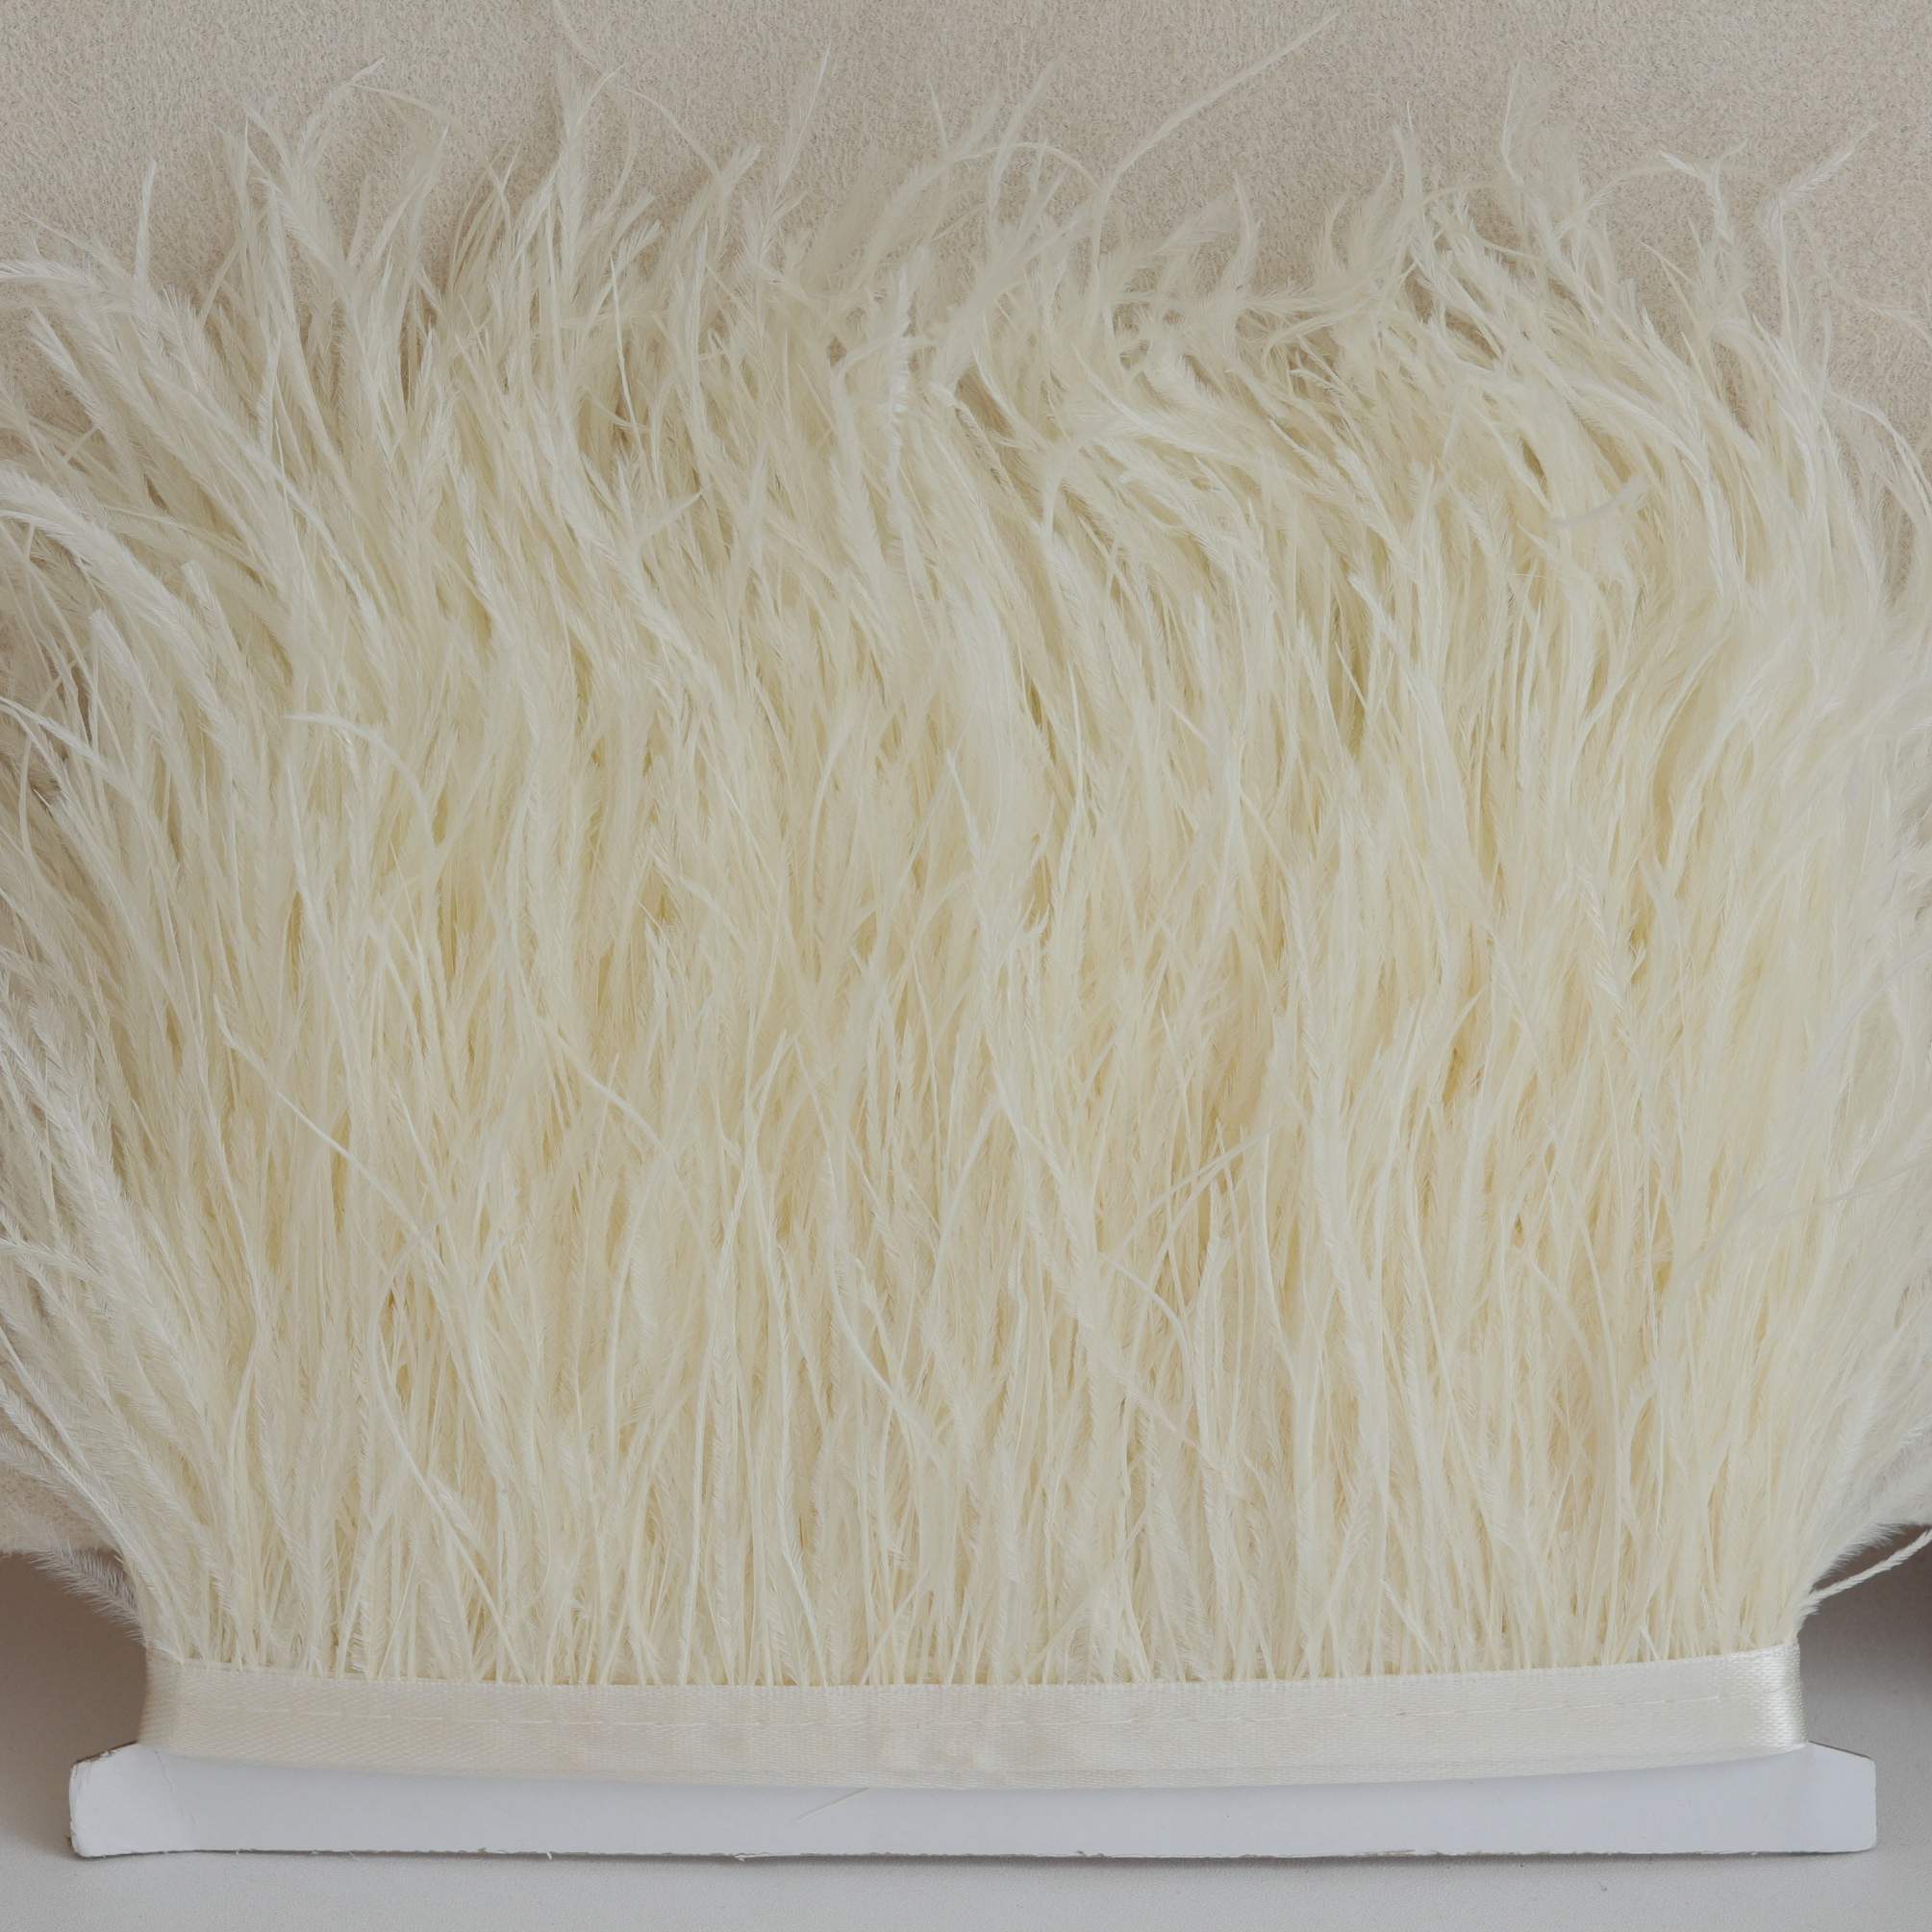 Ostrich feather Off-white 8-10 / 10-15 / 15-18